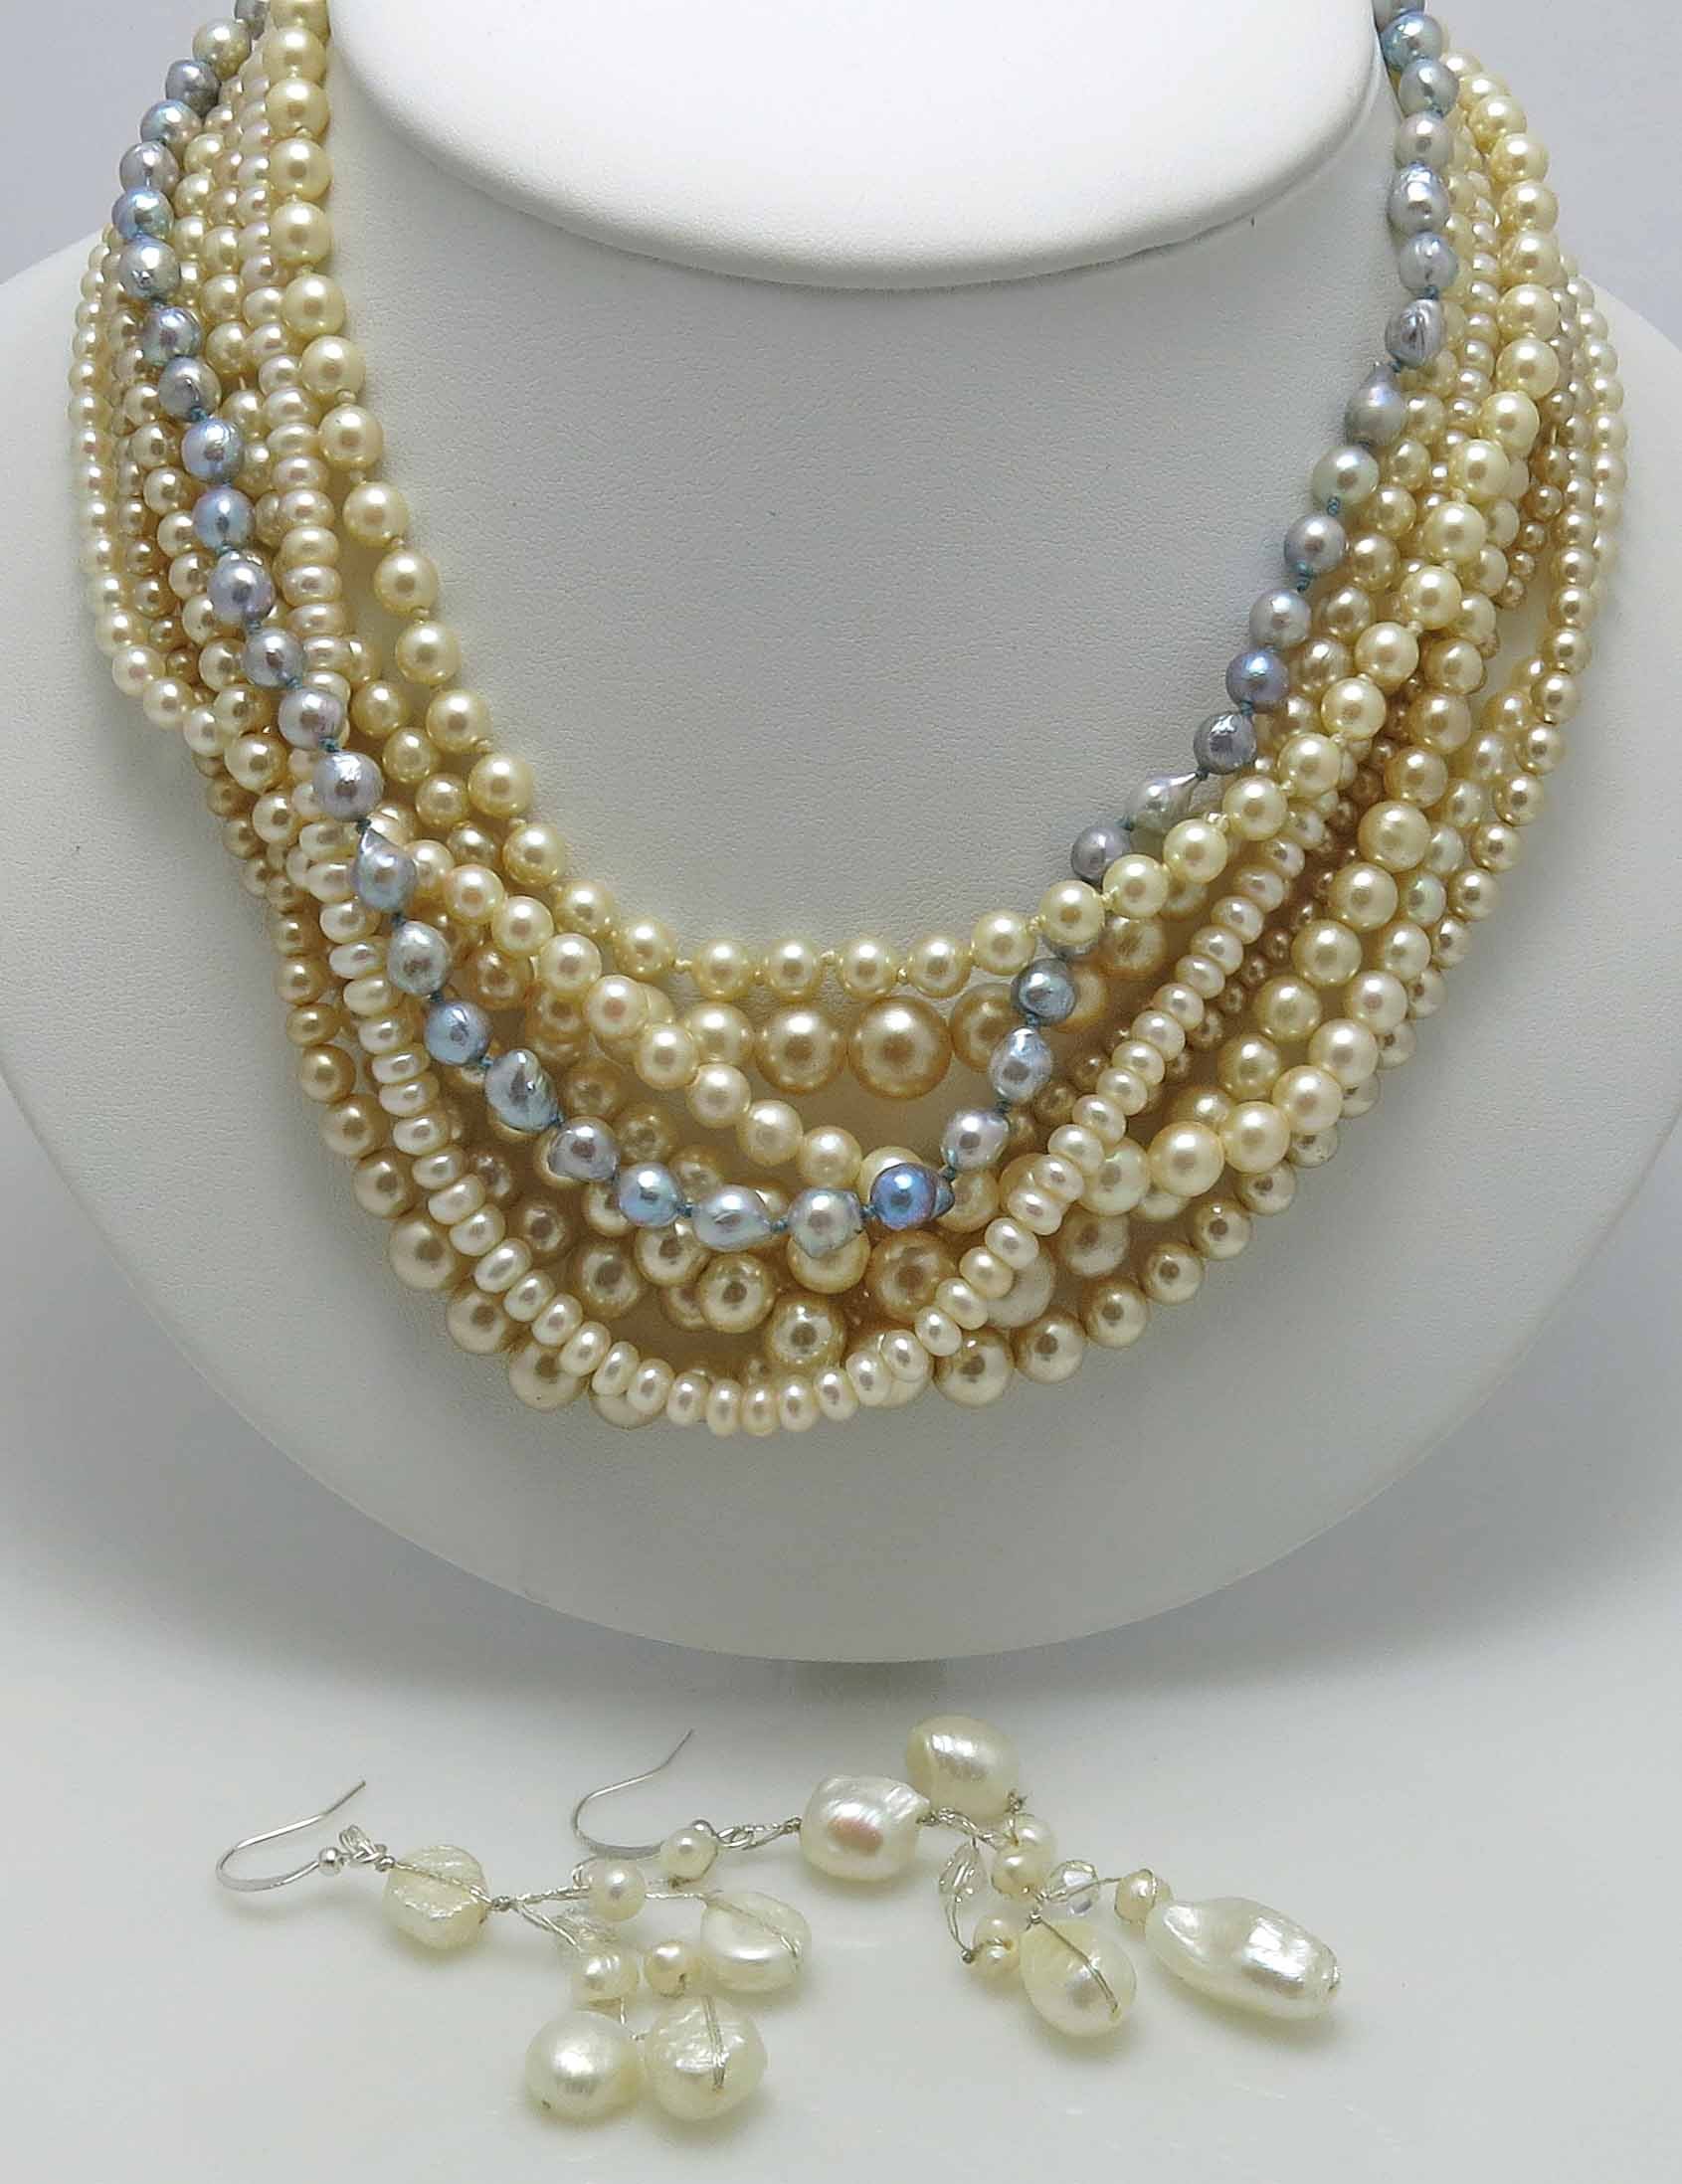 Pearl Collection - Lot 870858 | ALLBIDS